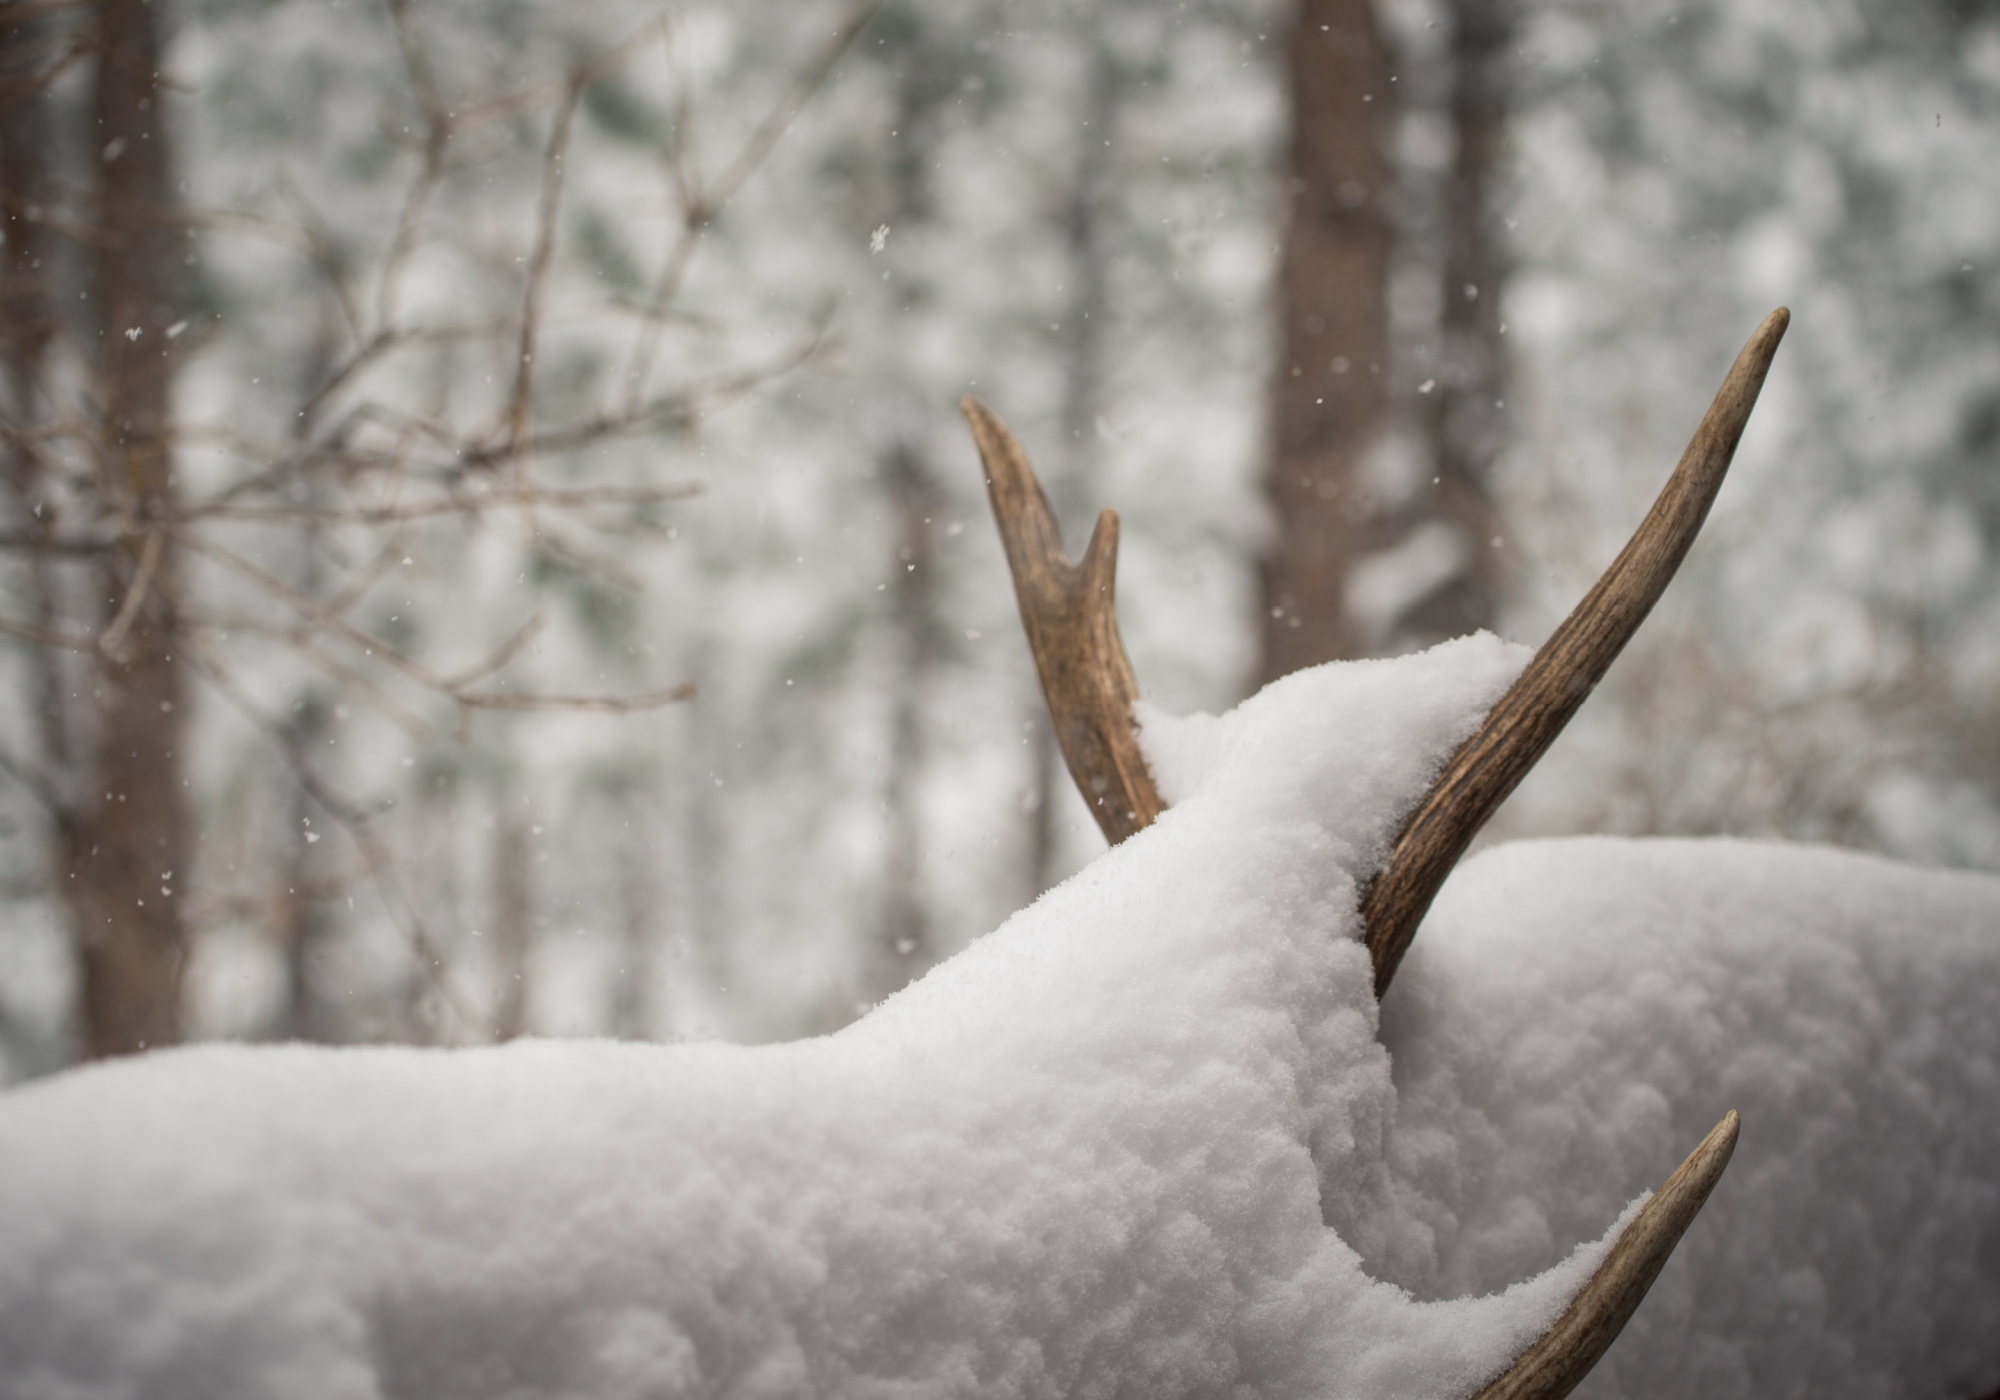 Utah Closes All Shed Hunting Until May. Some Hunters Aren’t Happy About It